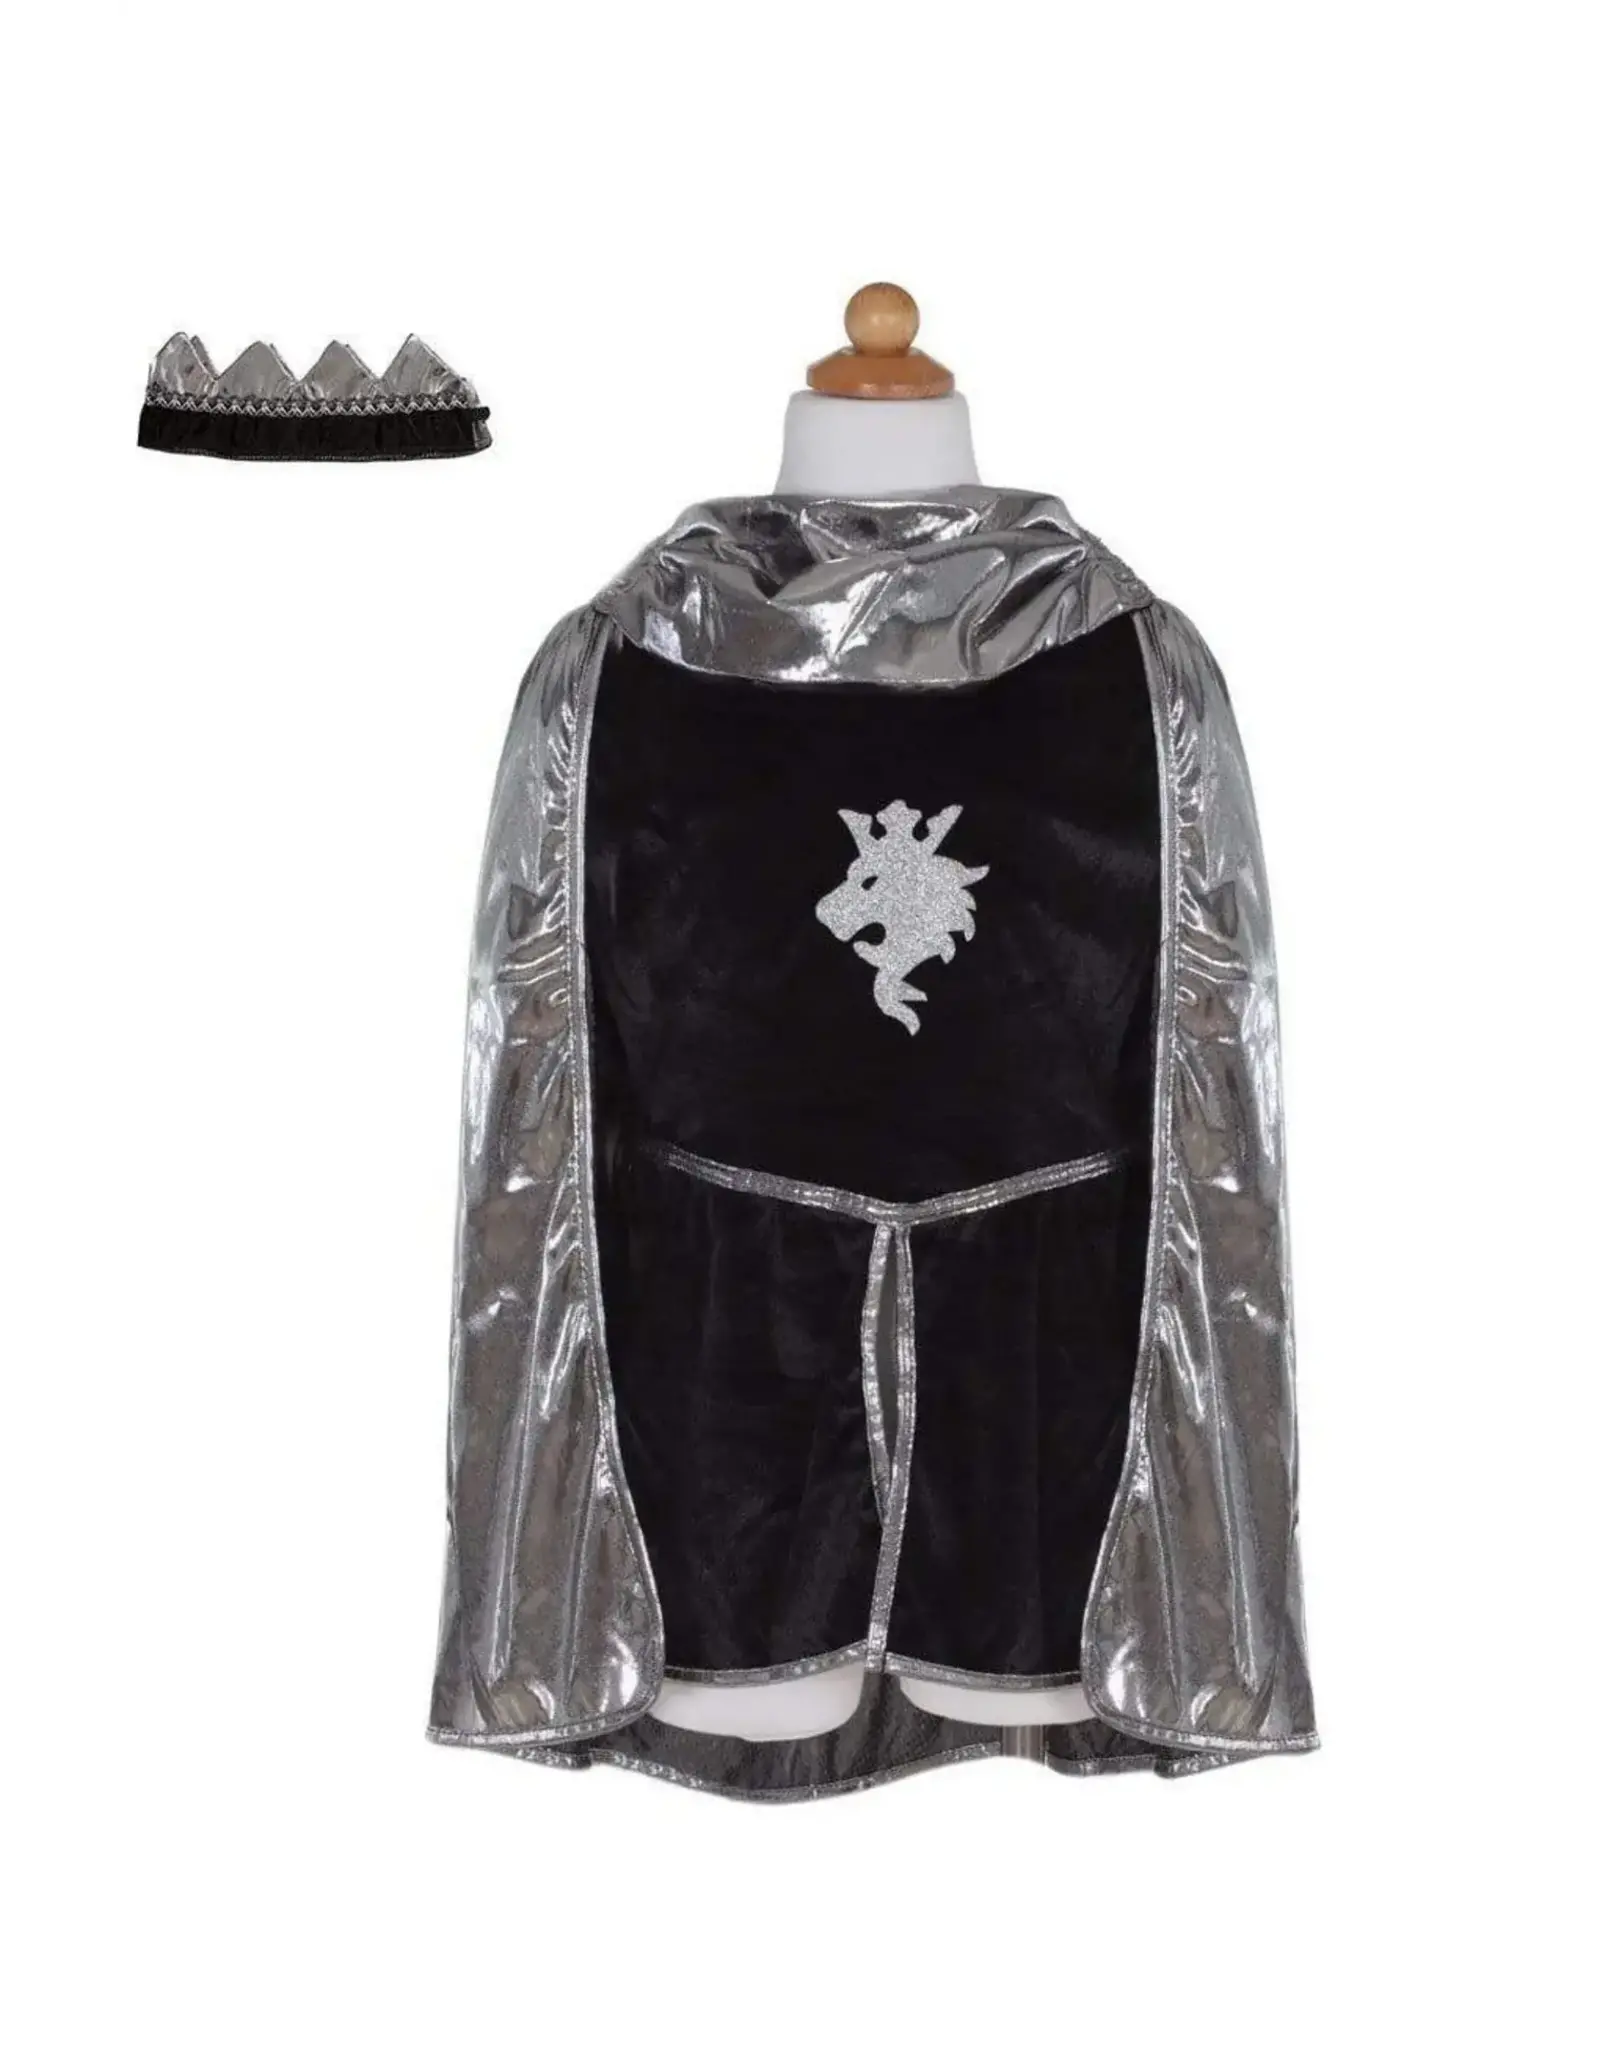 Great Pretenders Silver Knight Set with Tunic, Cape and Crown, Size 5/6